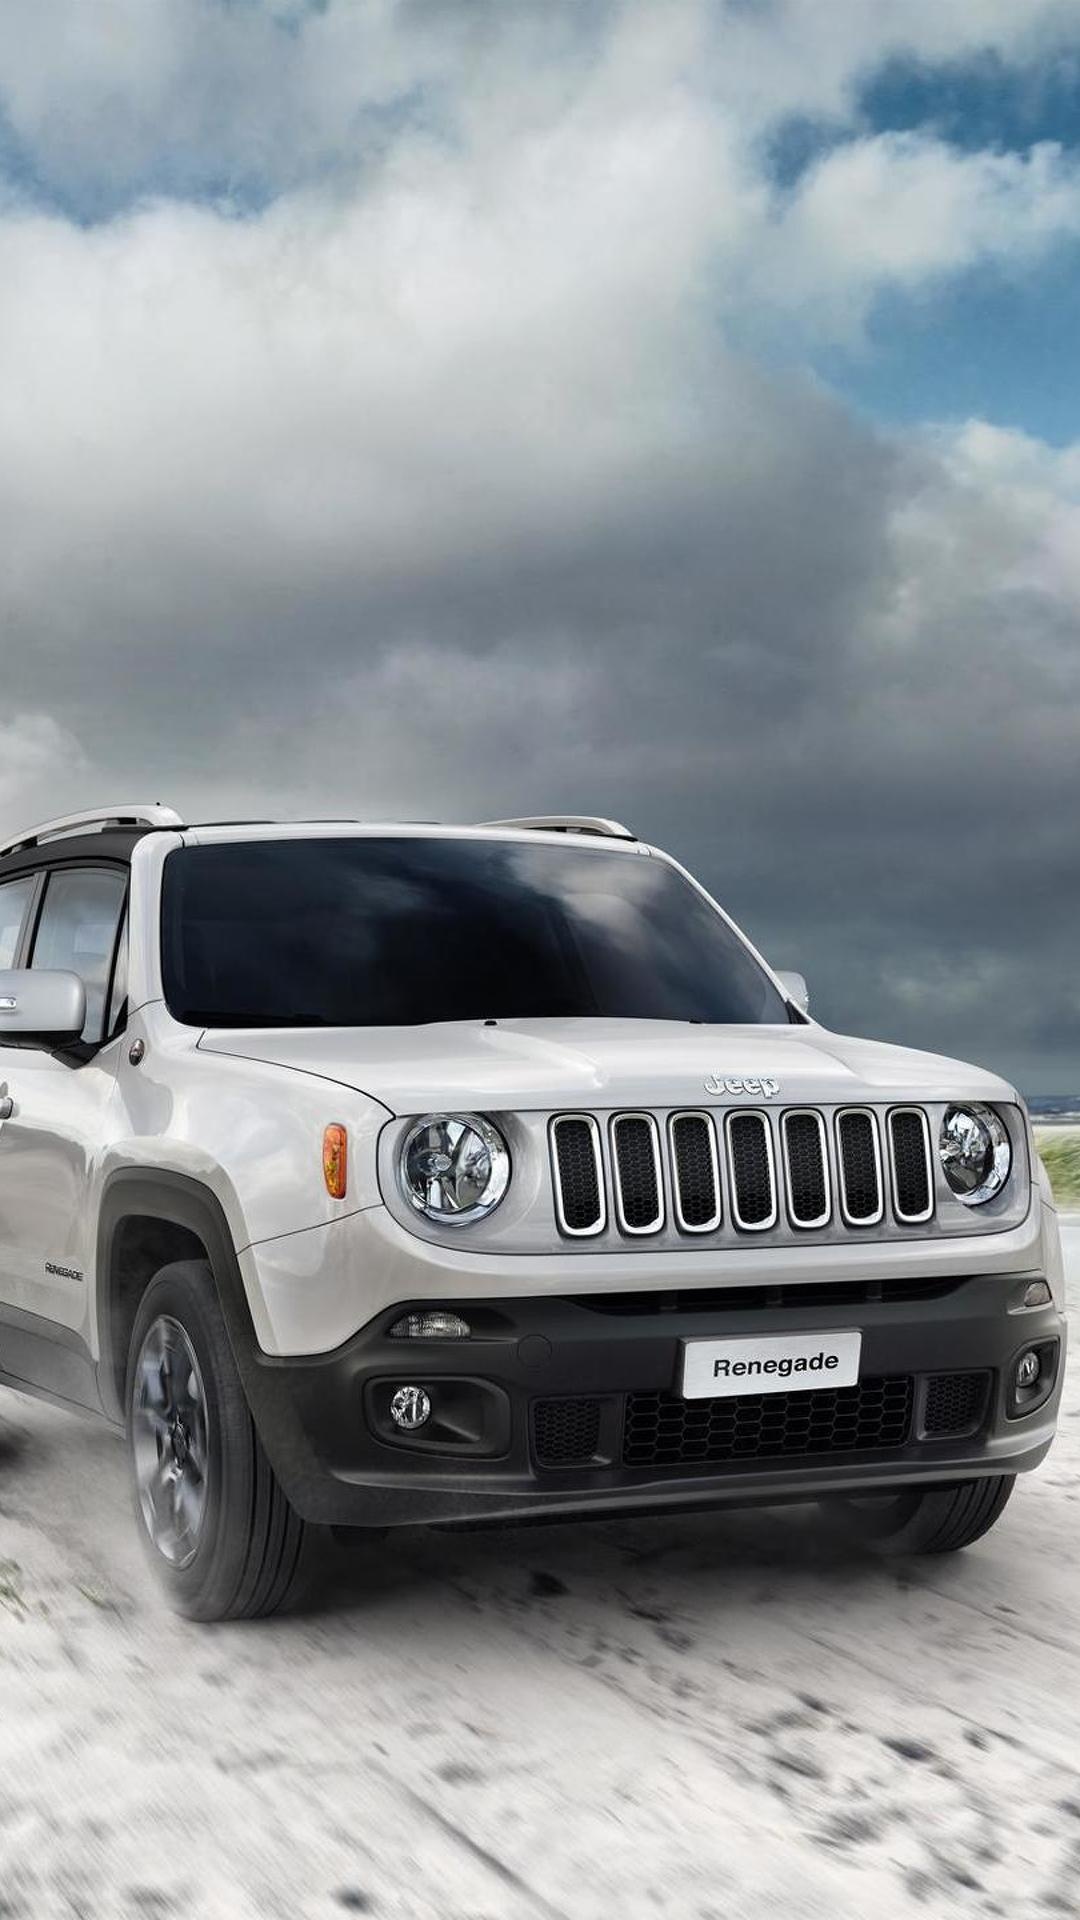 Jeep Renegade, Euro-spec details, Sleek and stylish, Durable off-road capabilities, 1080x1920 Full HD Handy